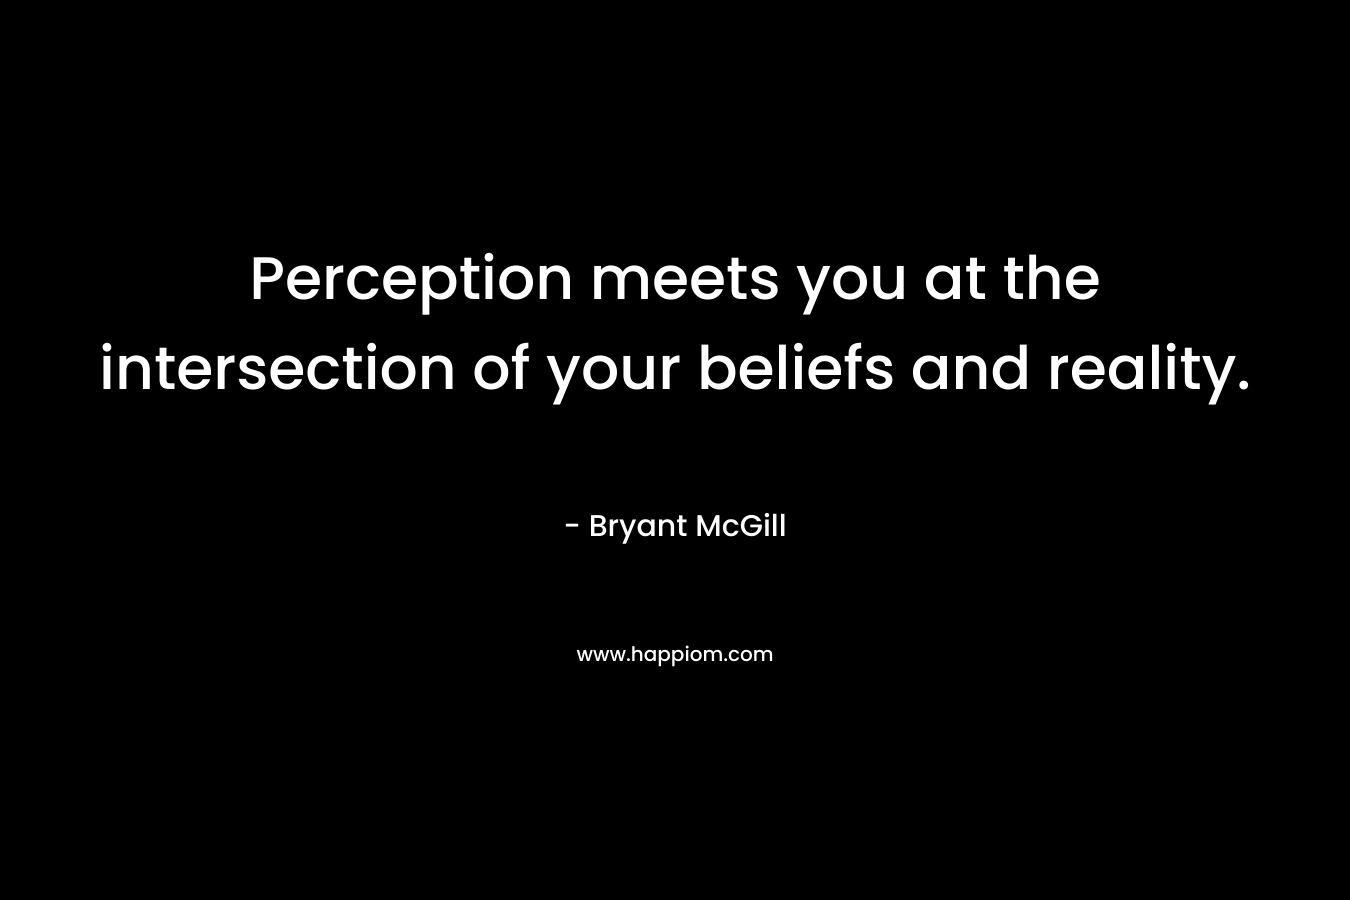 Perception meets you at the intersection of your beliefs and reality. – Bryant McGill